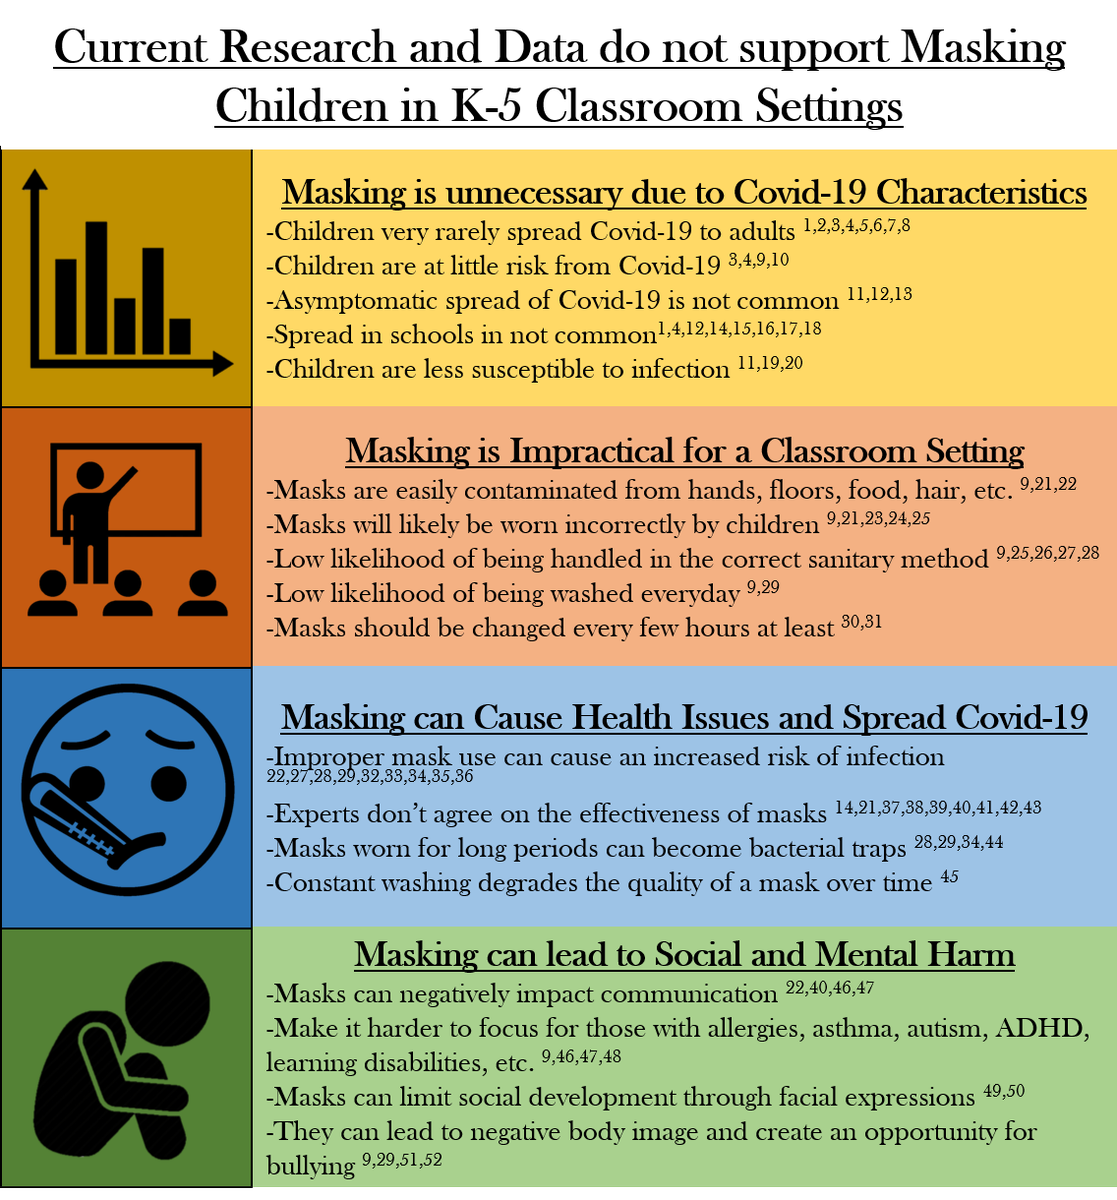 Here is an updated version of my infographic providing data that shows masking young children in school is impractical and not backed up by research. All 52 citations are in linked this thread.